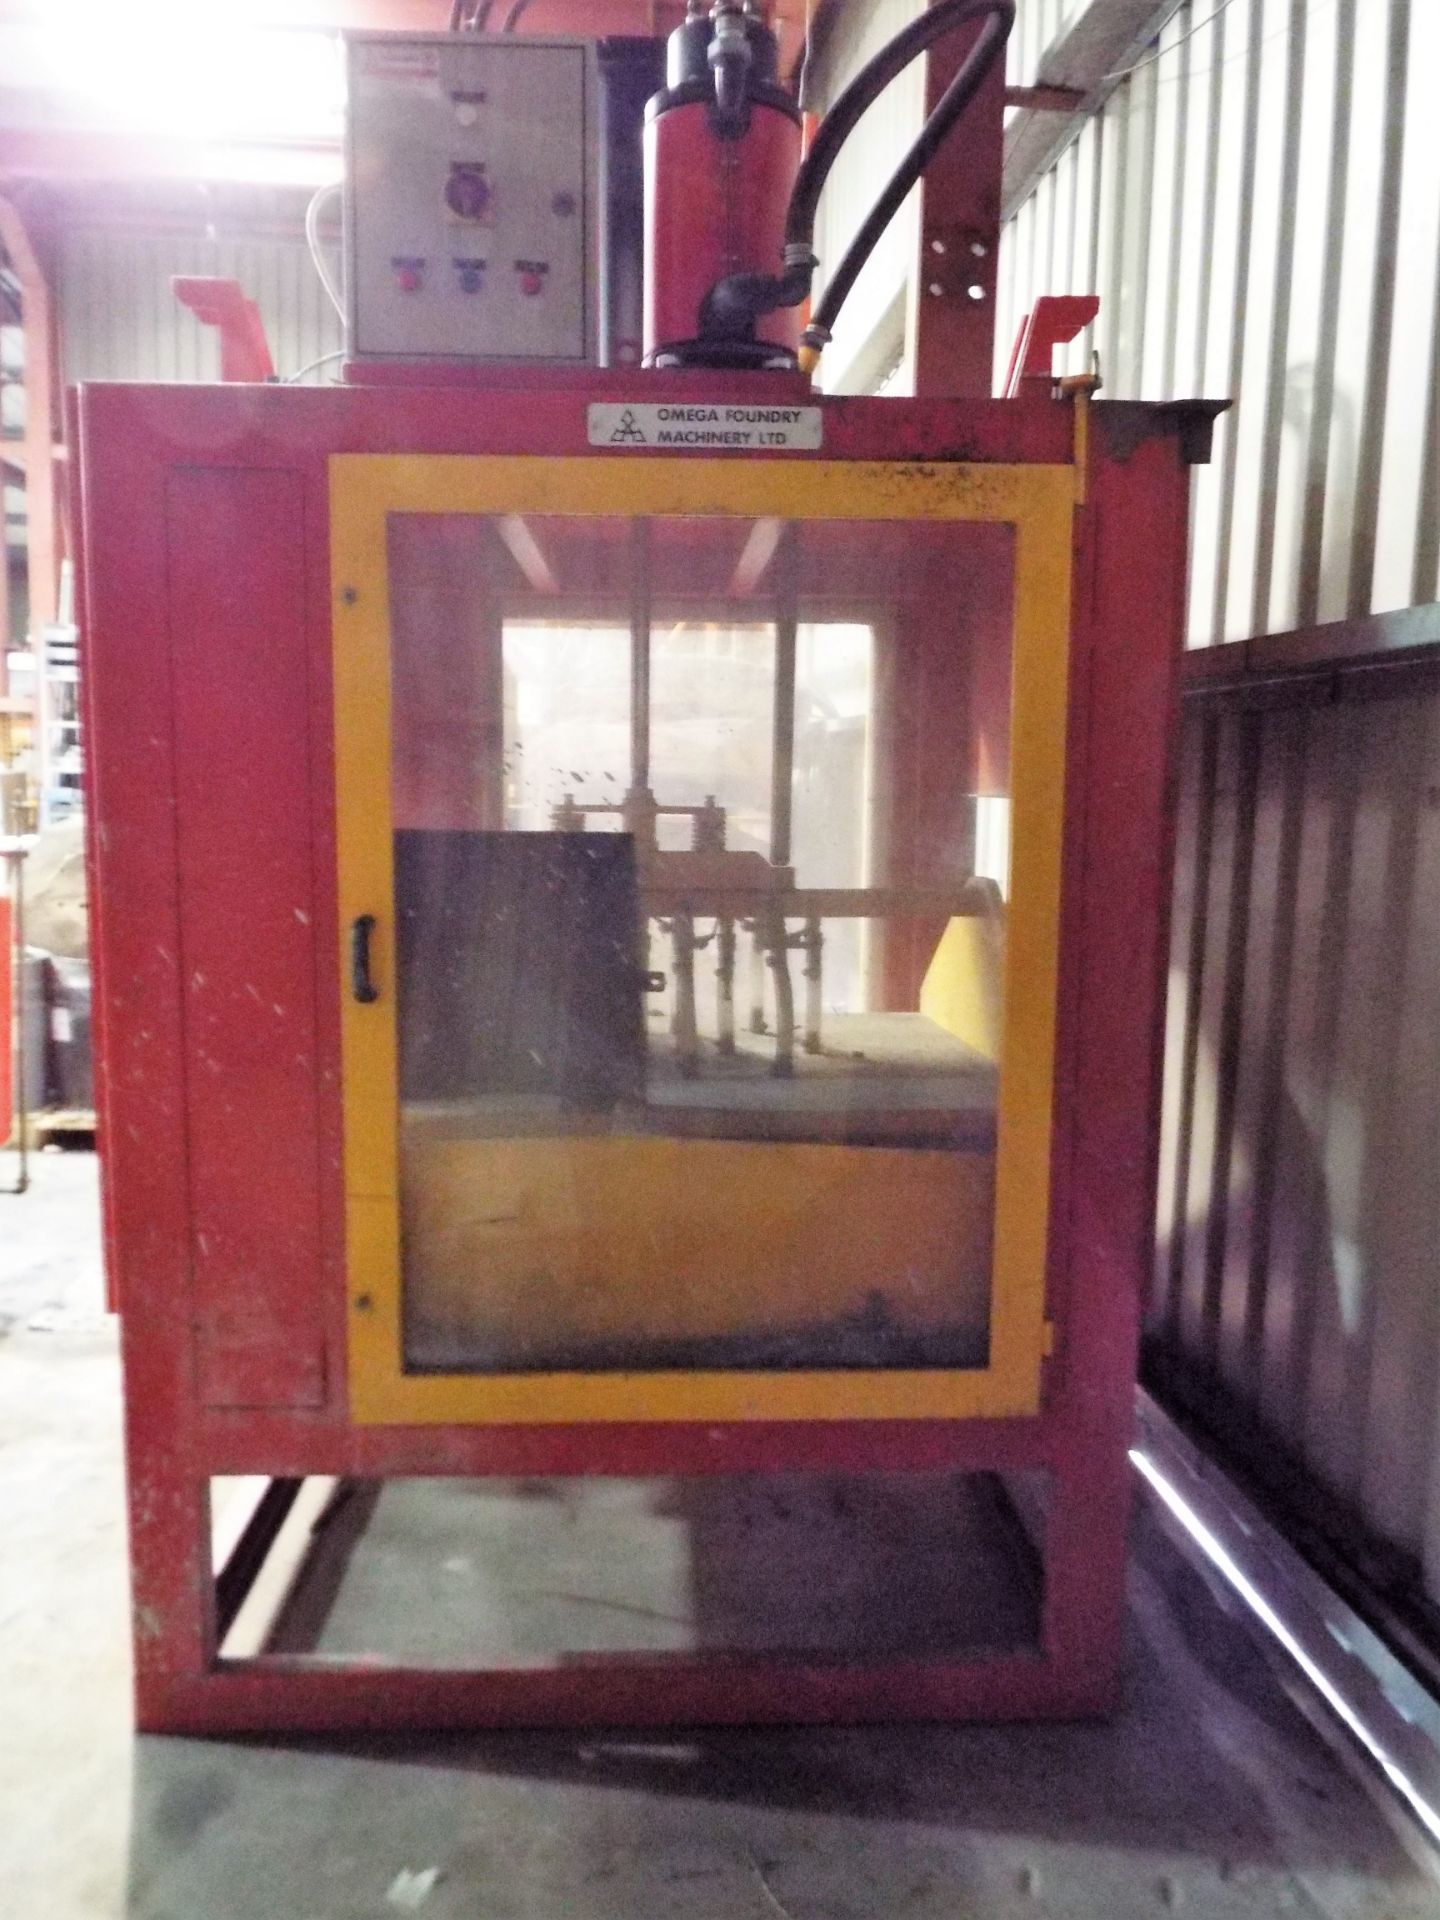 Omega Foundry Machinery Gassing Cabinet cw Gassing Plate,Secondary Heater & Gas Generator. - Image 11 of 24